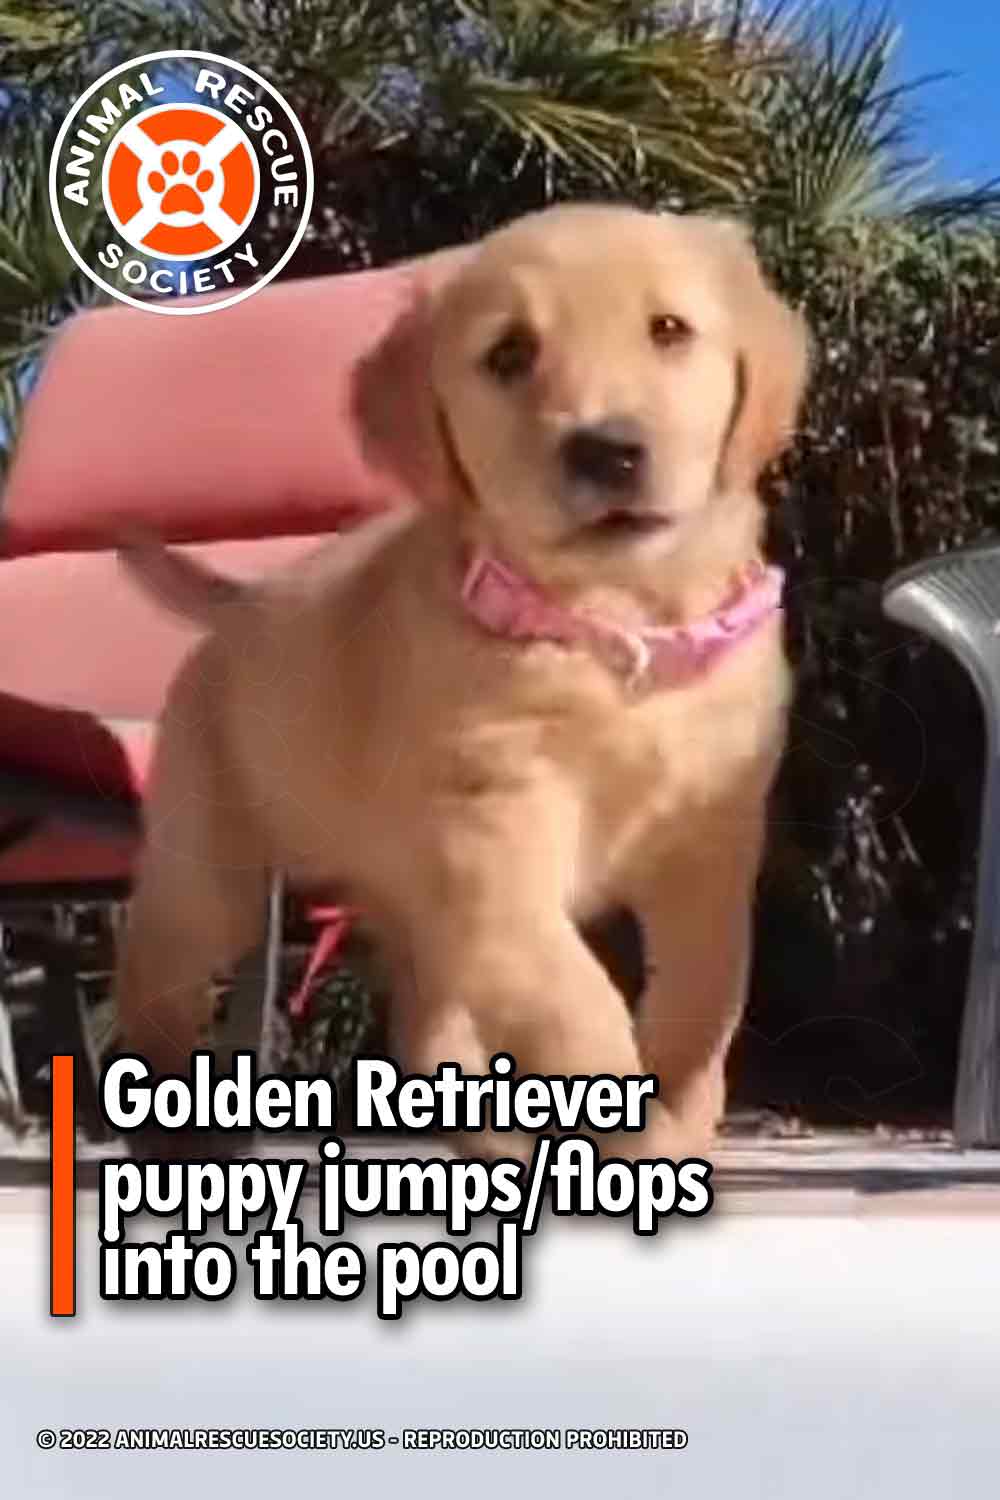 Golden Retriever puppy jumps/flops into the pool